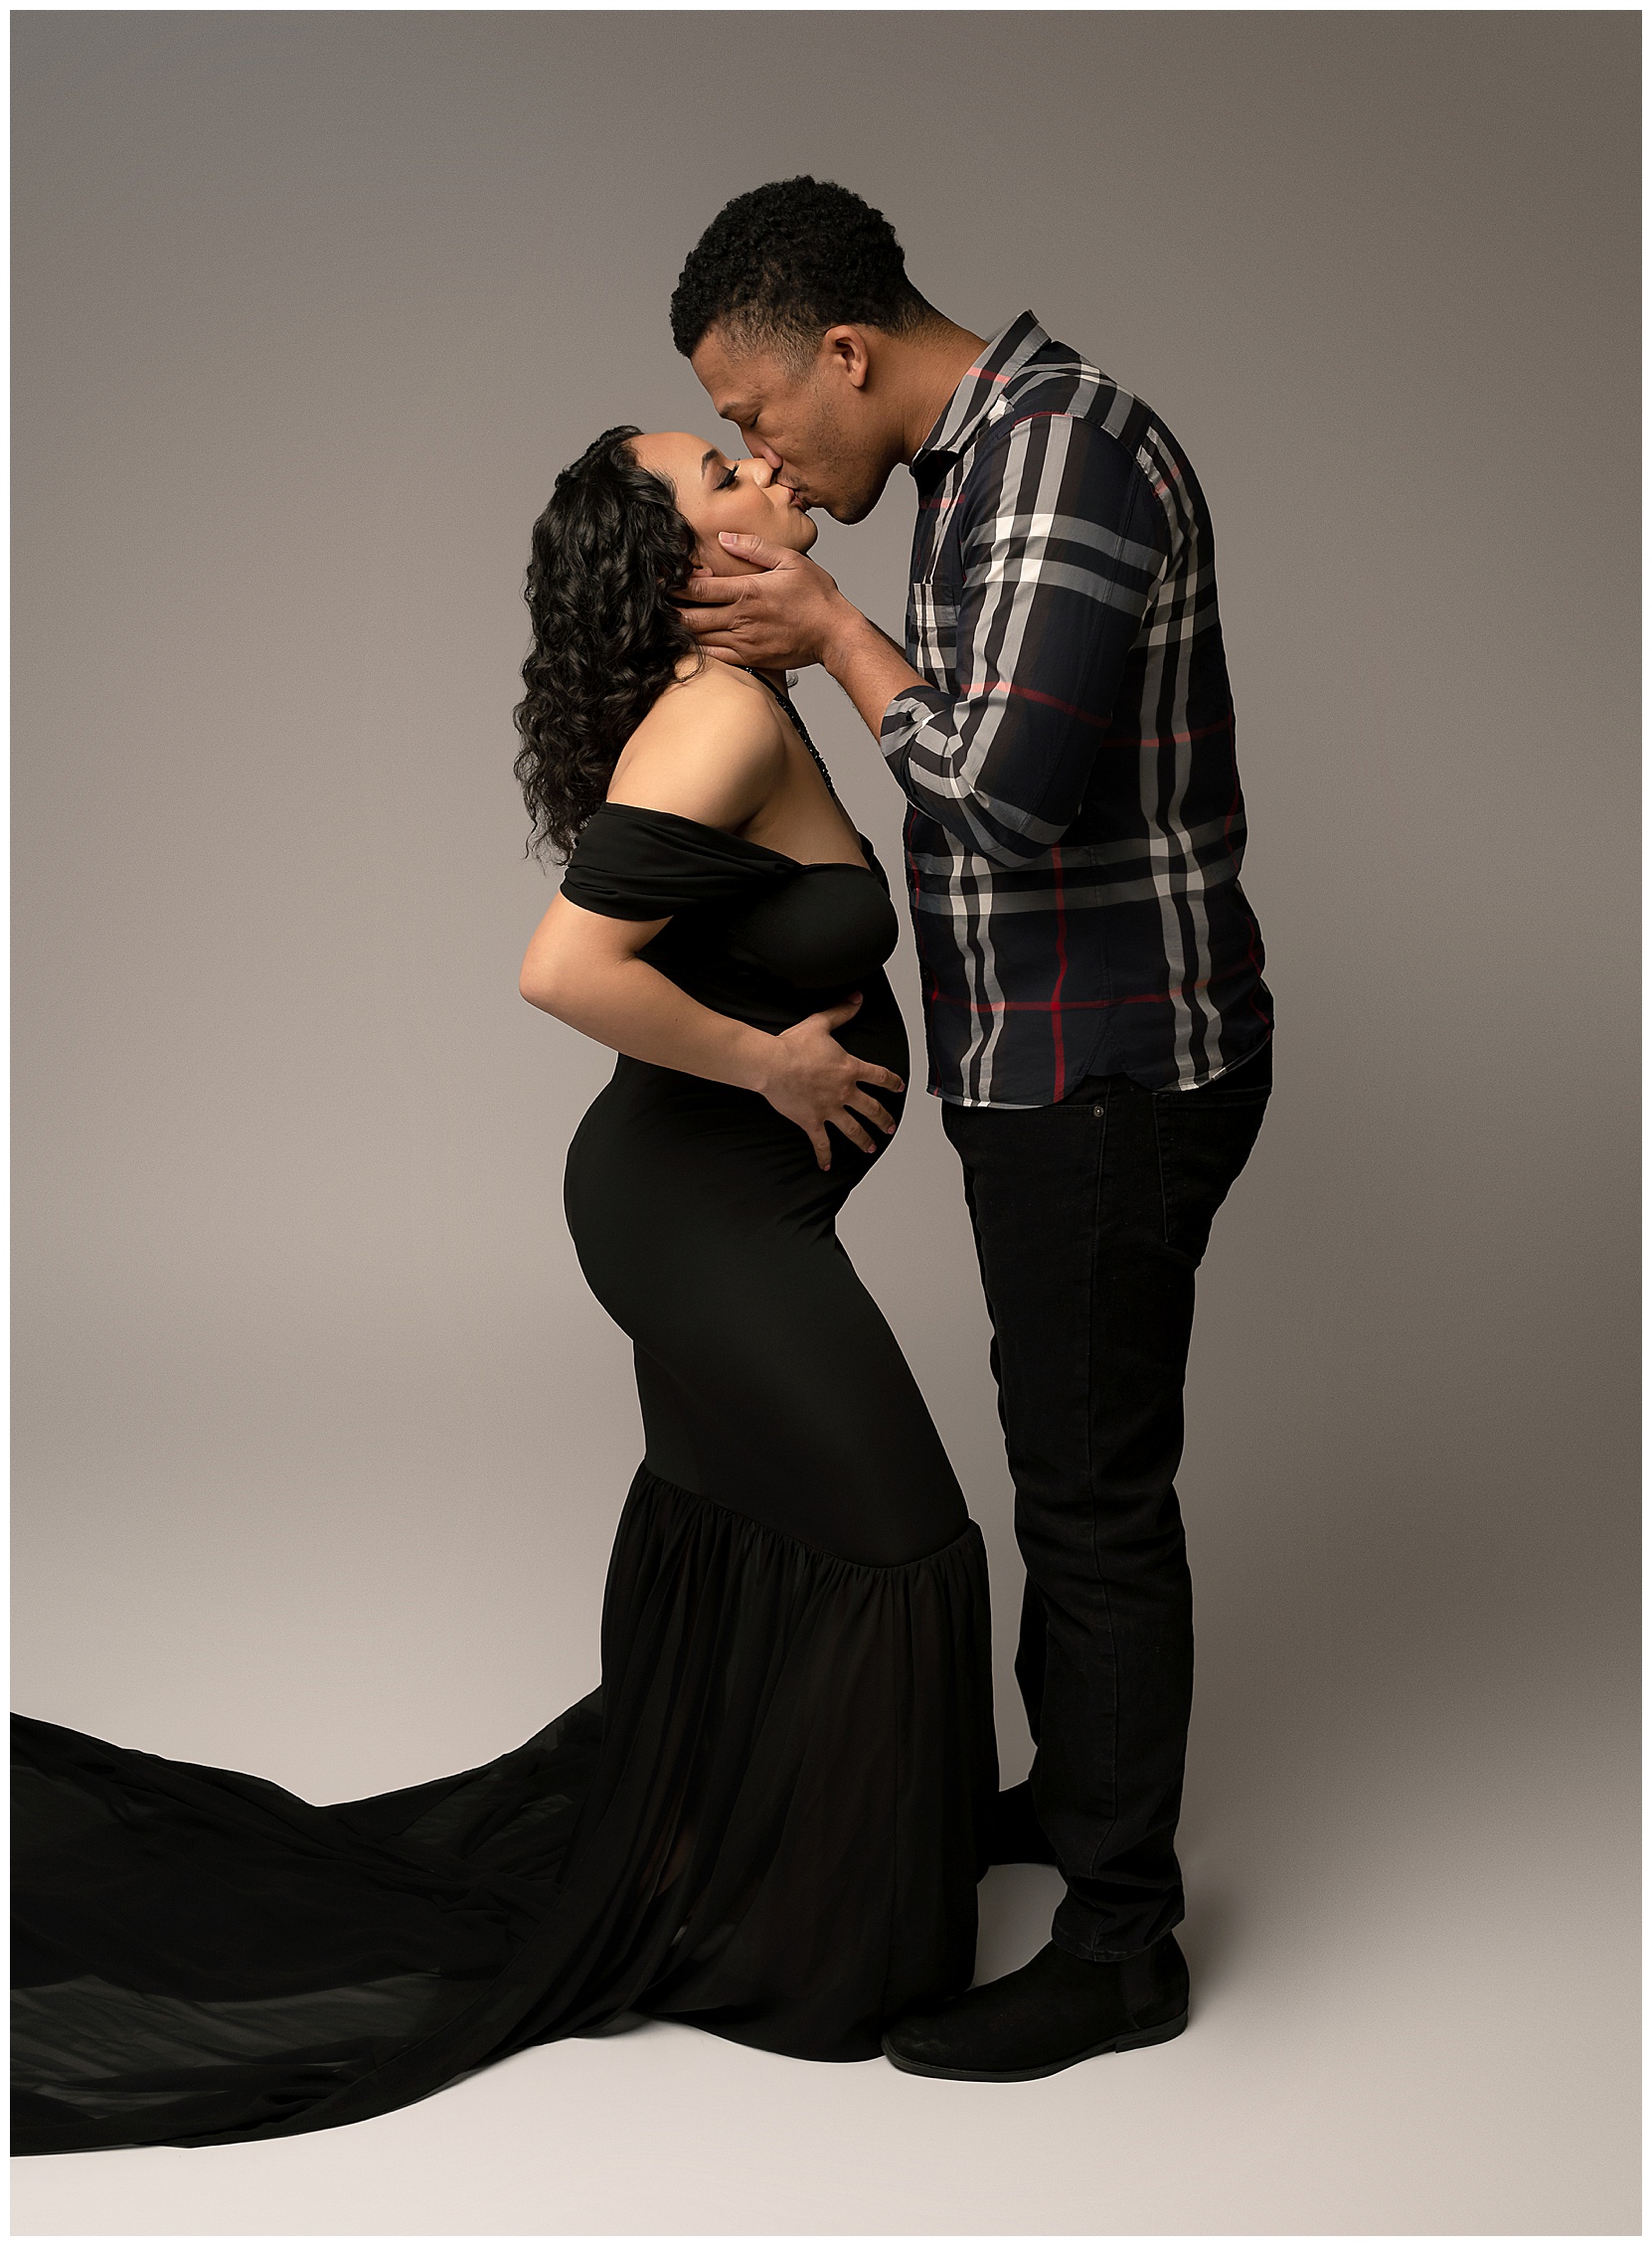 A color maternity photo featuring a pregnant woman and her partner facing each other and kissing. Photo is taken in front of a plain gray background.